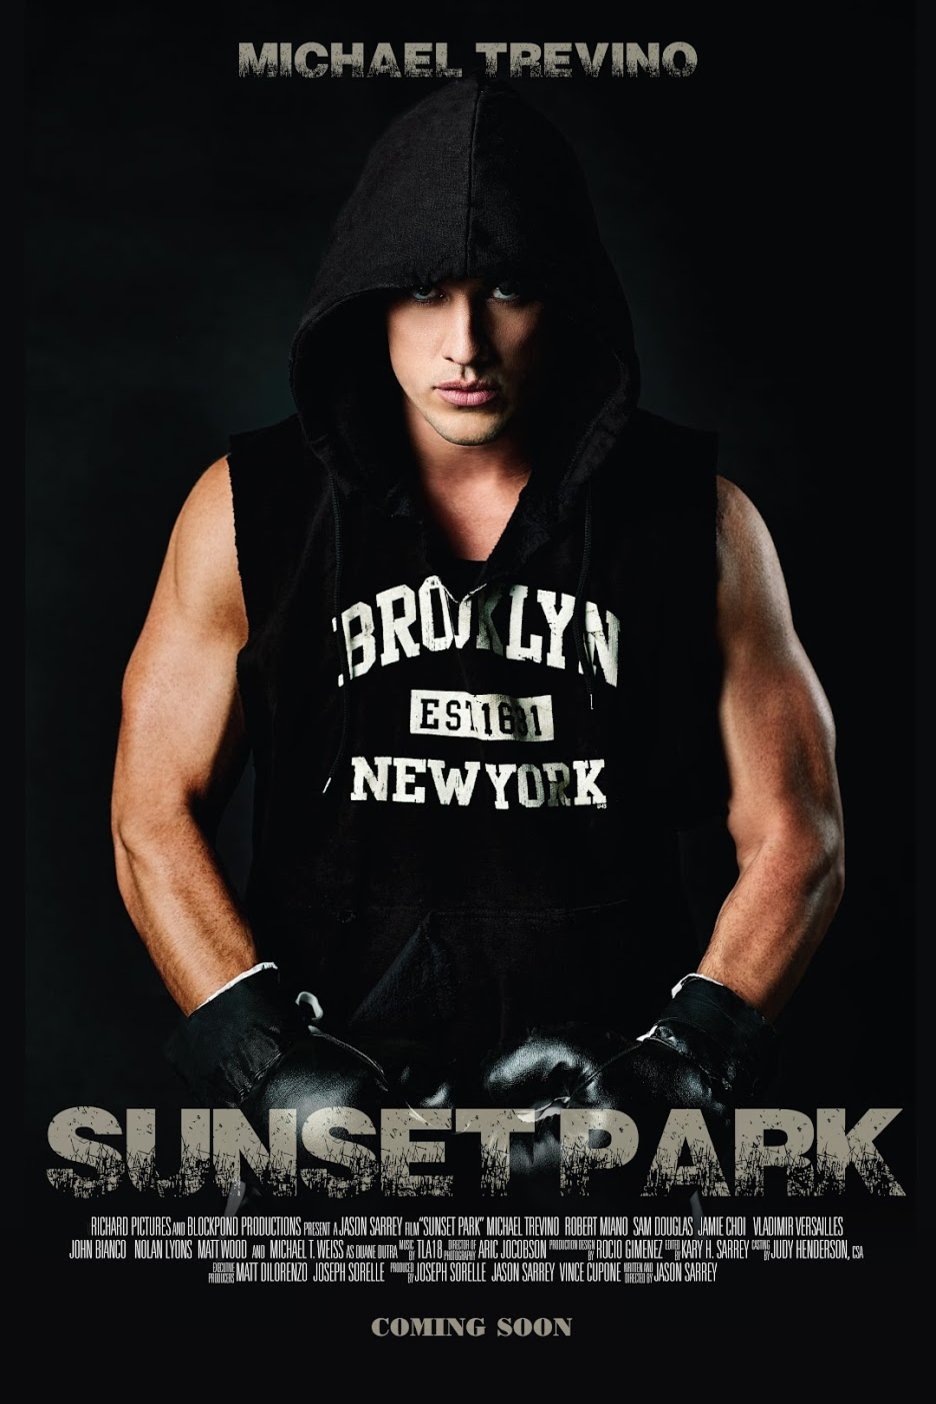 Poster of the movie Sunset Park